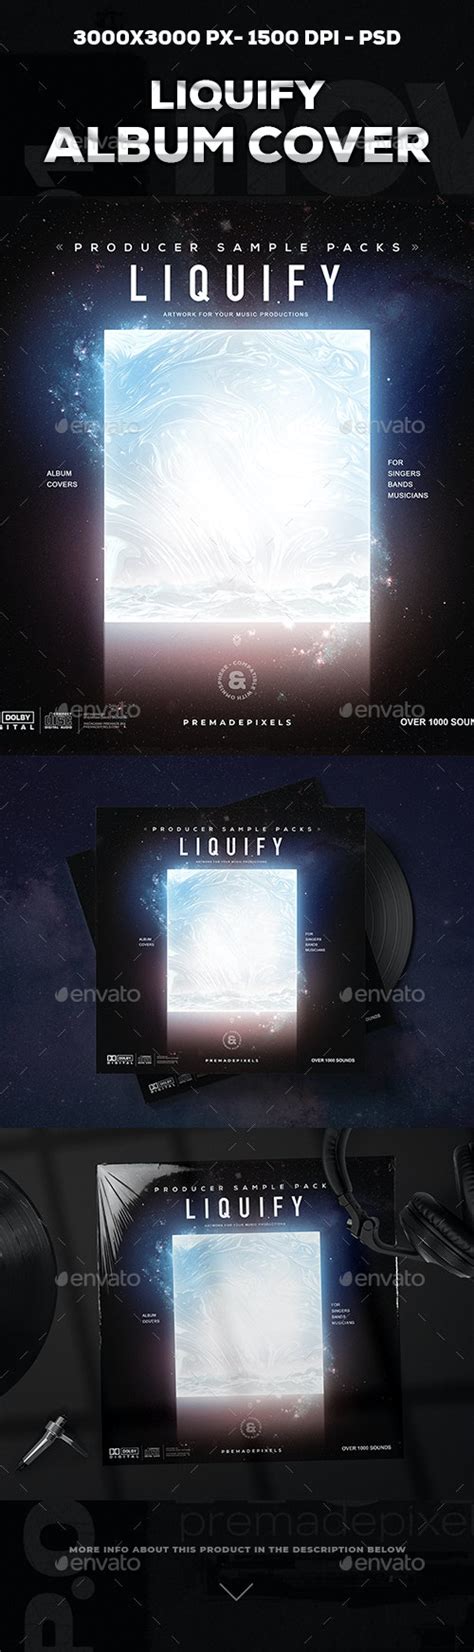 Liquify Album Cover By Premadepixels Graphicriver